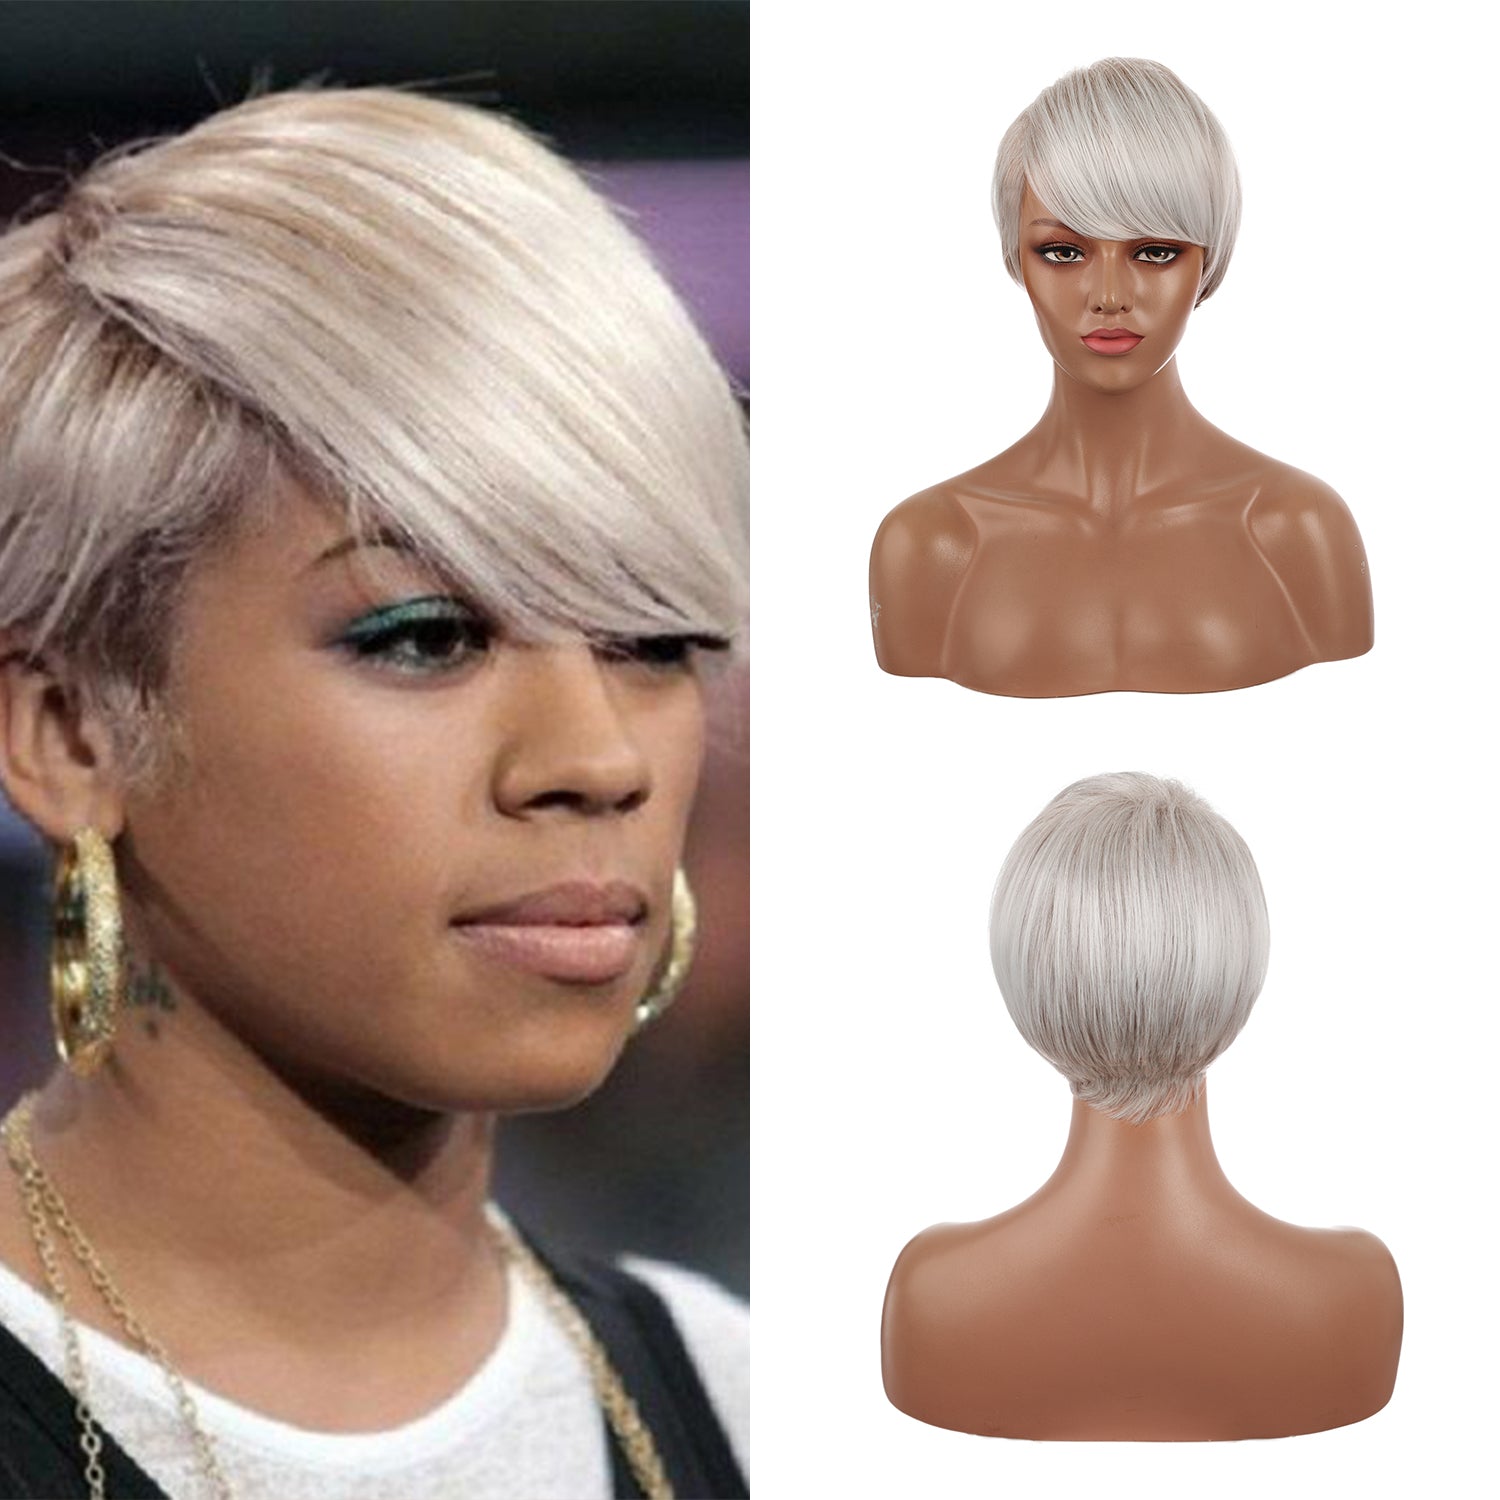 Trianna | Silver Short Pixie Cut Wavy Synthetic Hair Wig with Bangs